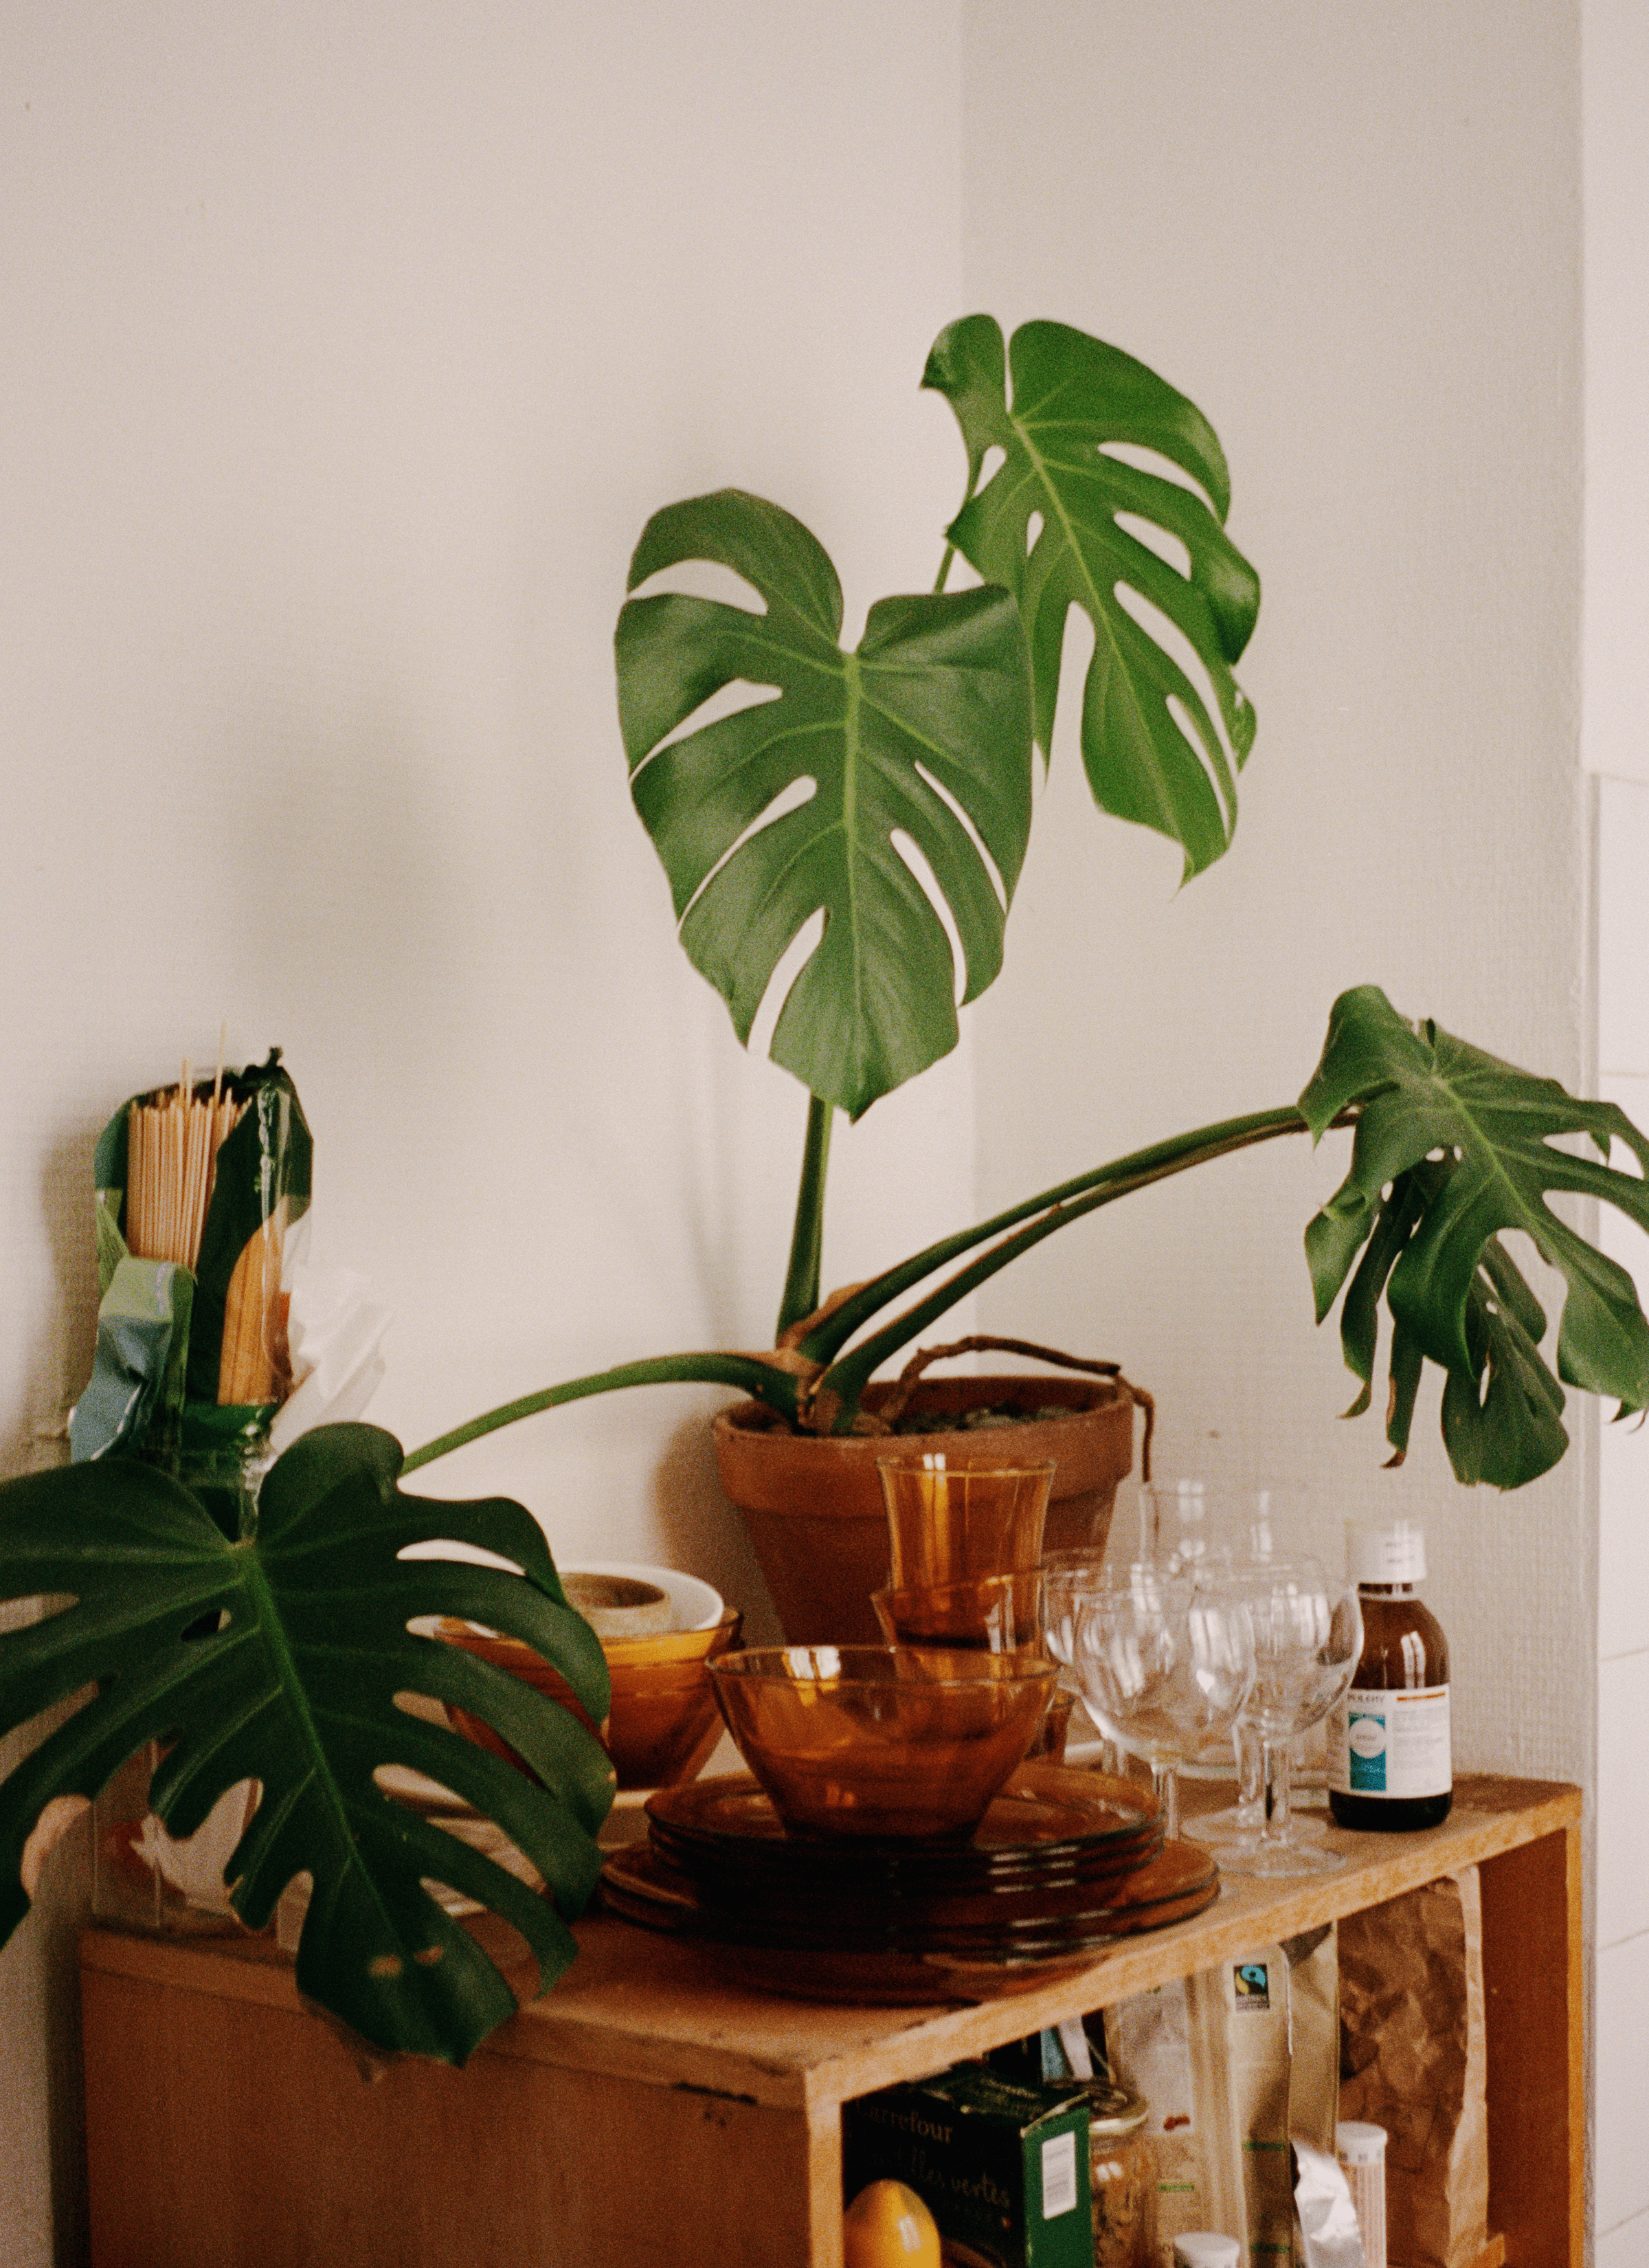 A potted monstera sitting in the corner on a opened cupboard with some glass bowl, plates, some wine glasses and a glass bottle.